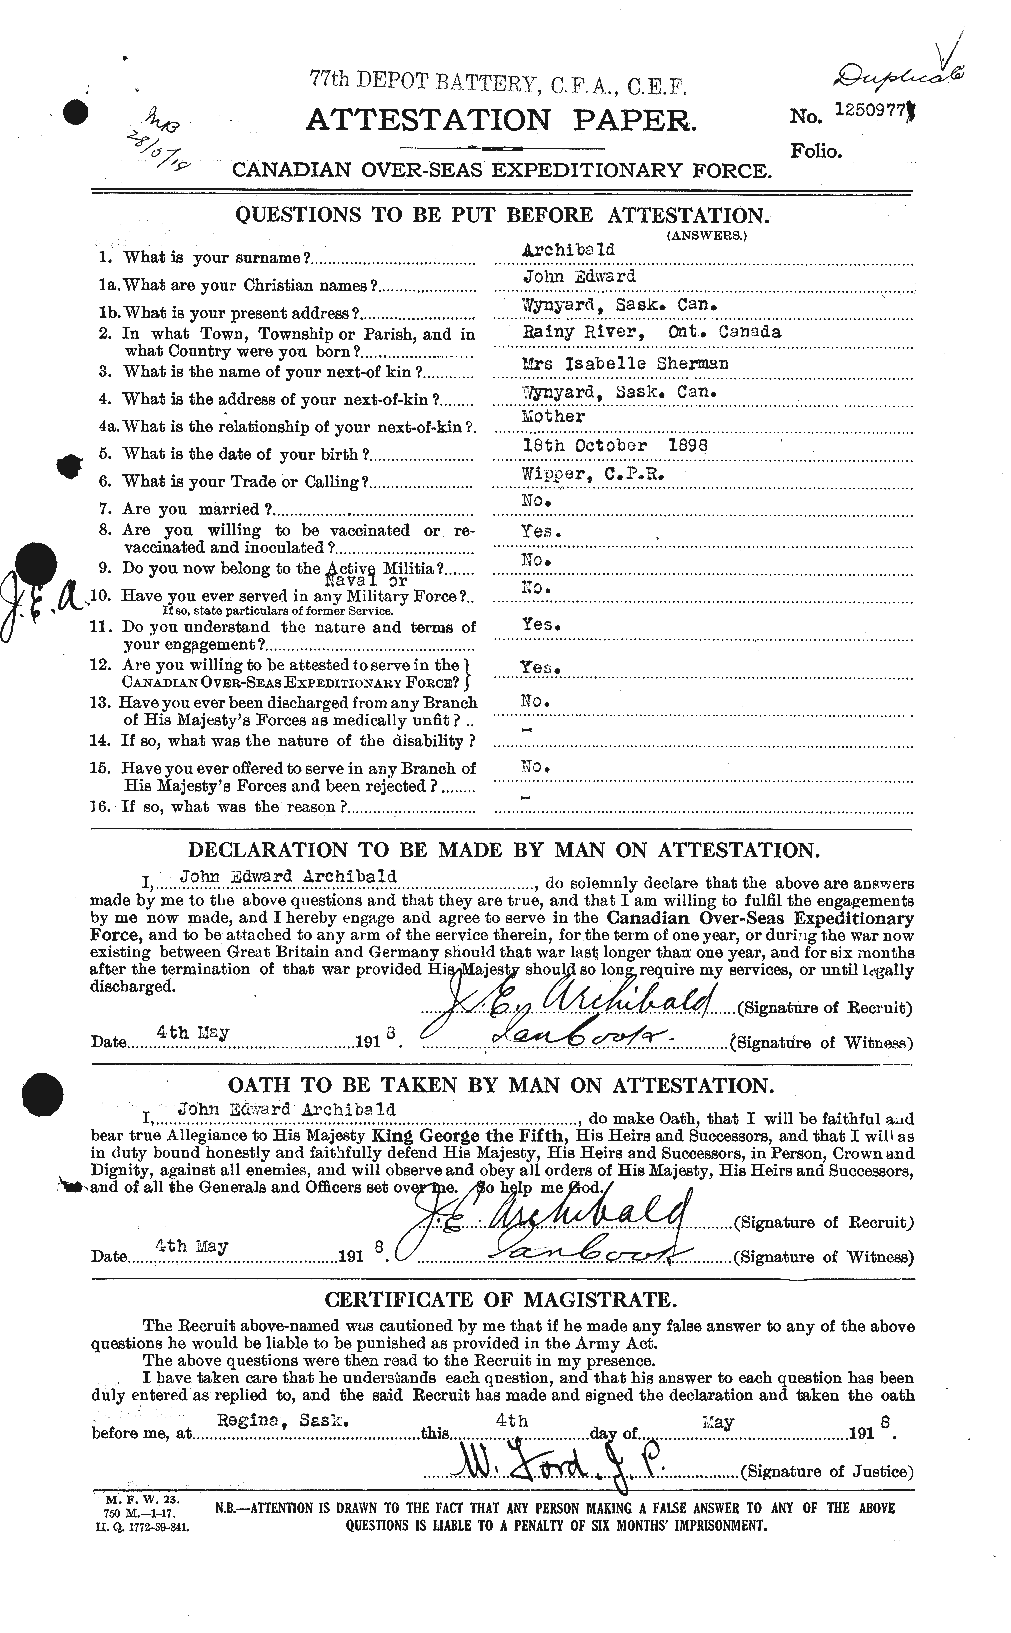 Personnel Records of the First World War - CEF 211573a